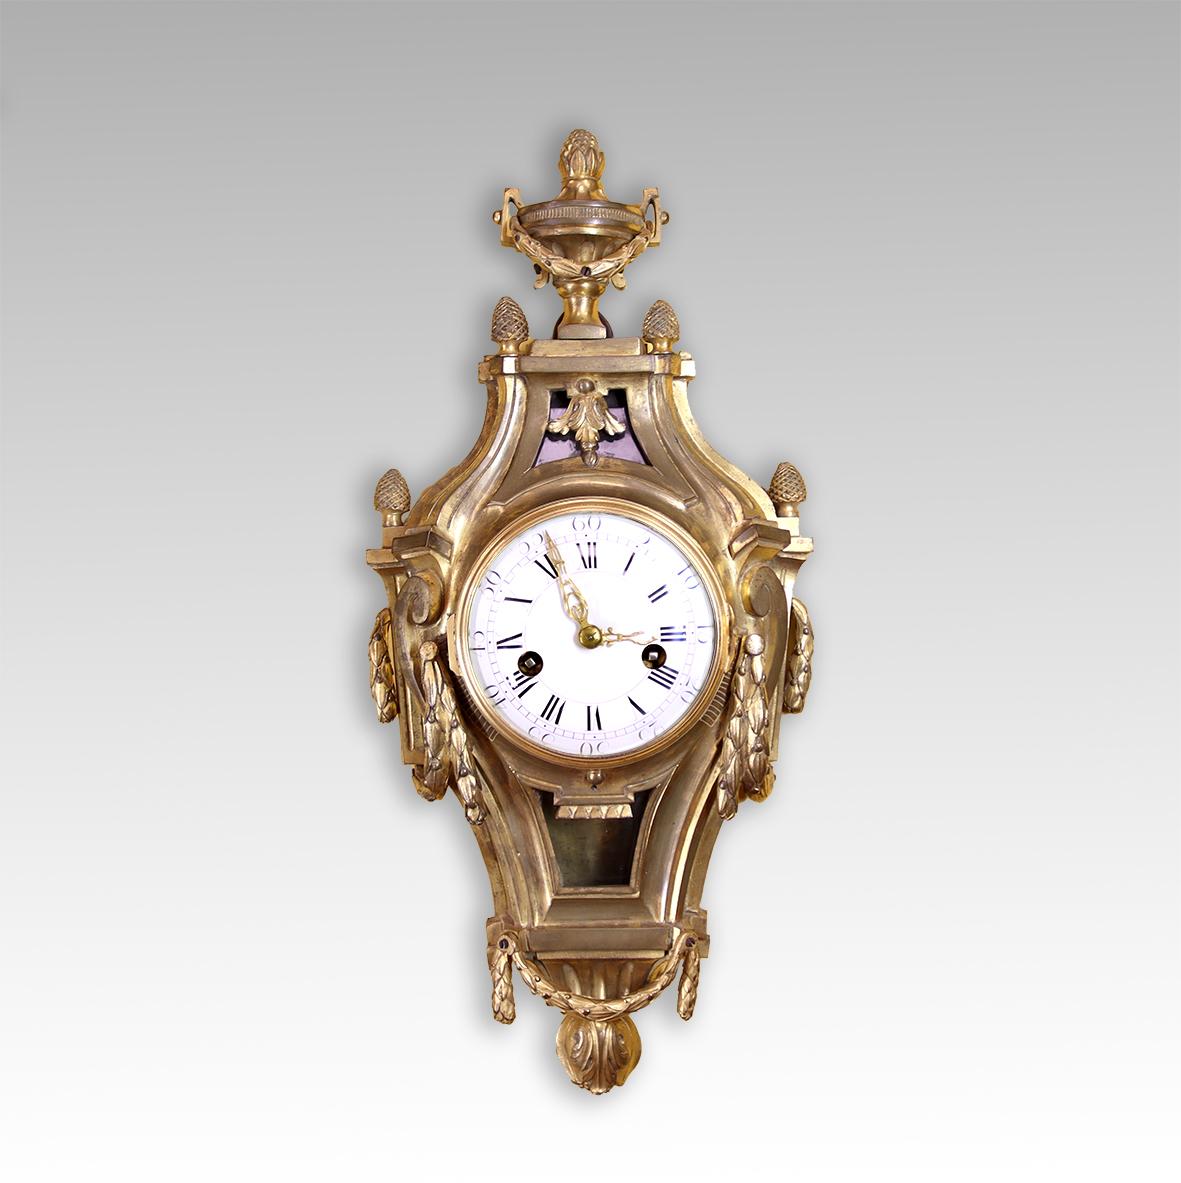 This beautiful small cartel clock dates from the late 1760’s. This rare survivor is in excellent original condition, the large circular eight day movement strikes the hours on a bell, the pendulum having a silk suspension.

This charming clock is in